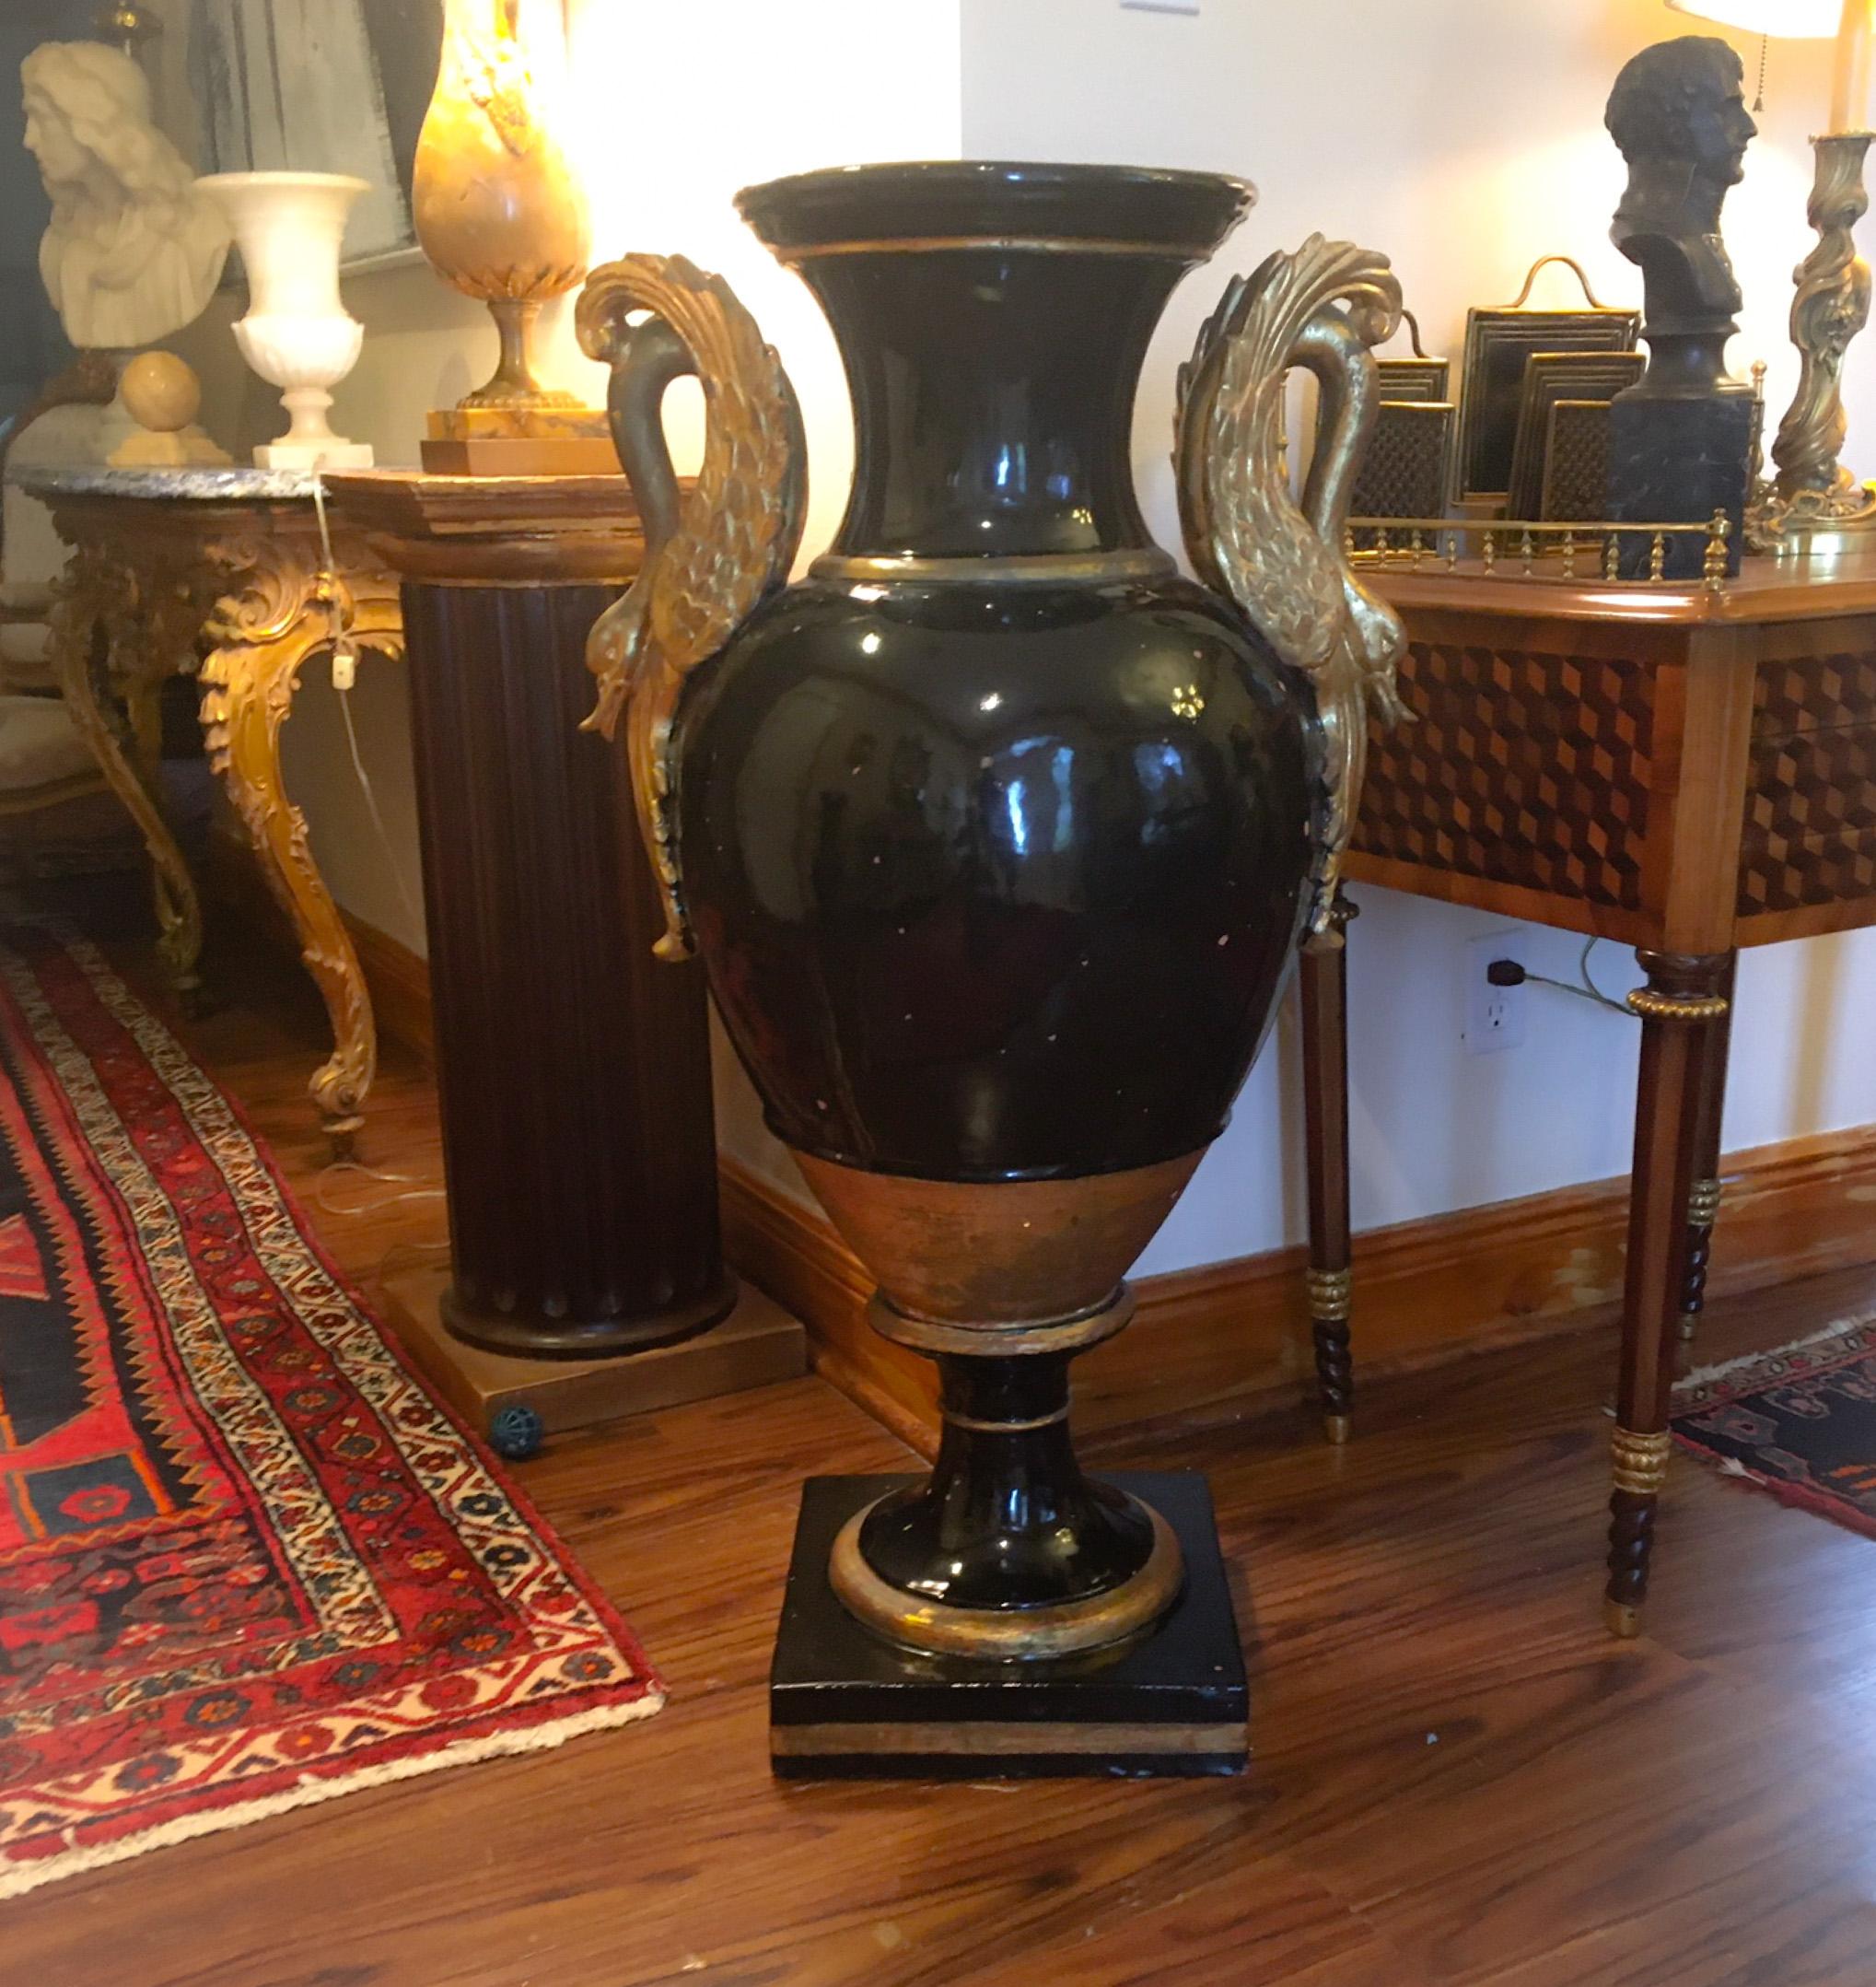 19th century French monumental terracotta cobalt blue glazed vase-urn

This elegant palace sized French cobalt blue glazed terracotta floor vase from the 
19th century, is a stunning statement piece. It is extremely rare in this size. The classic